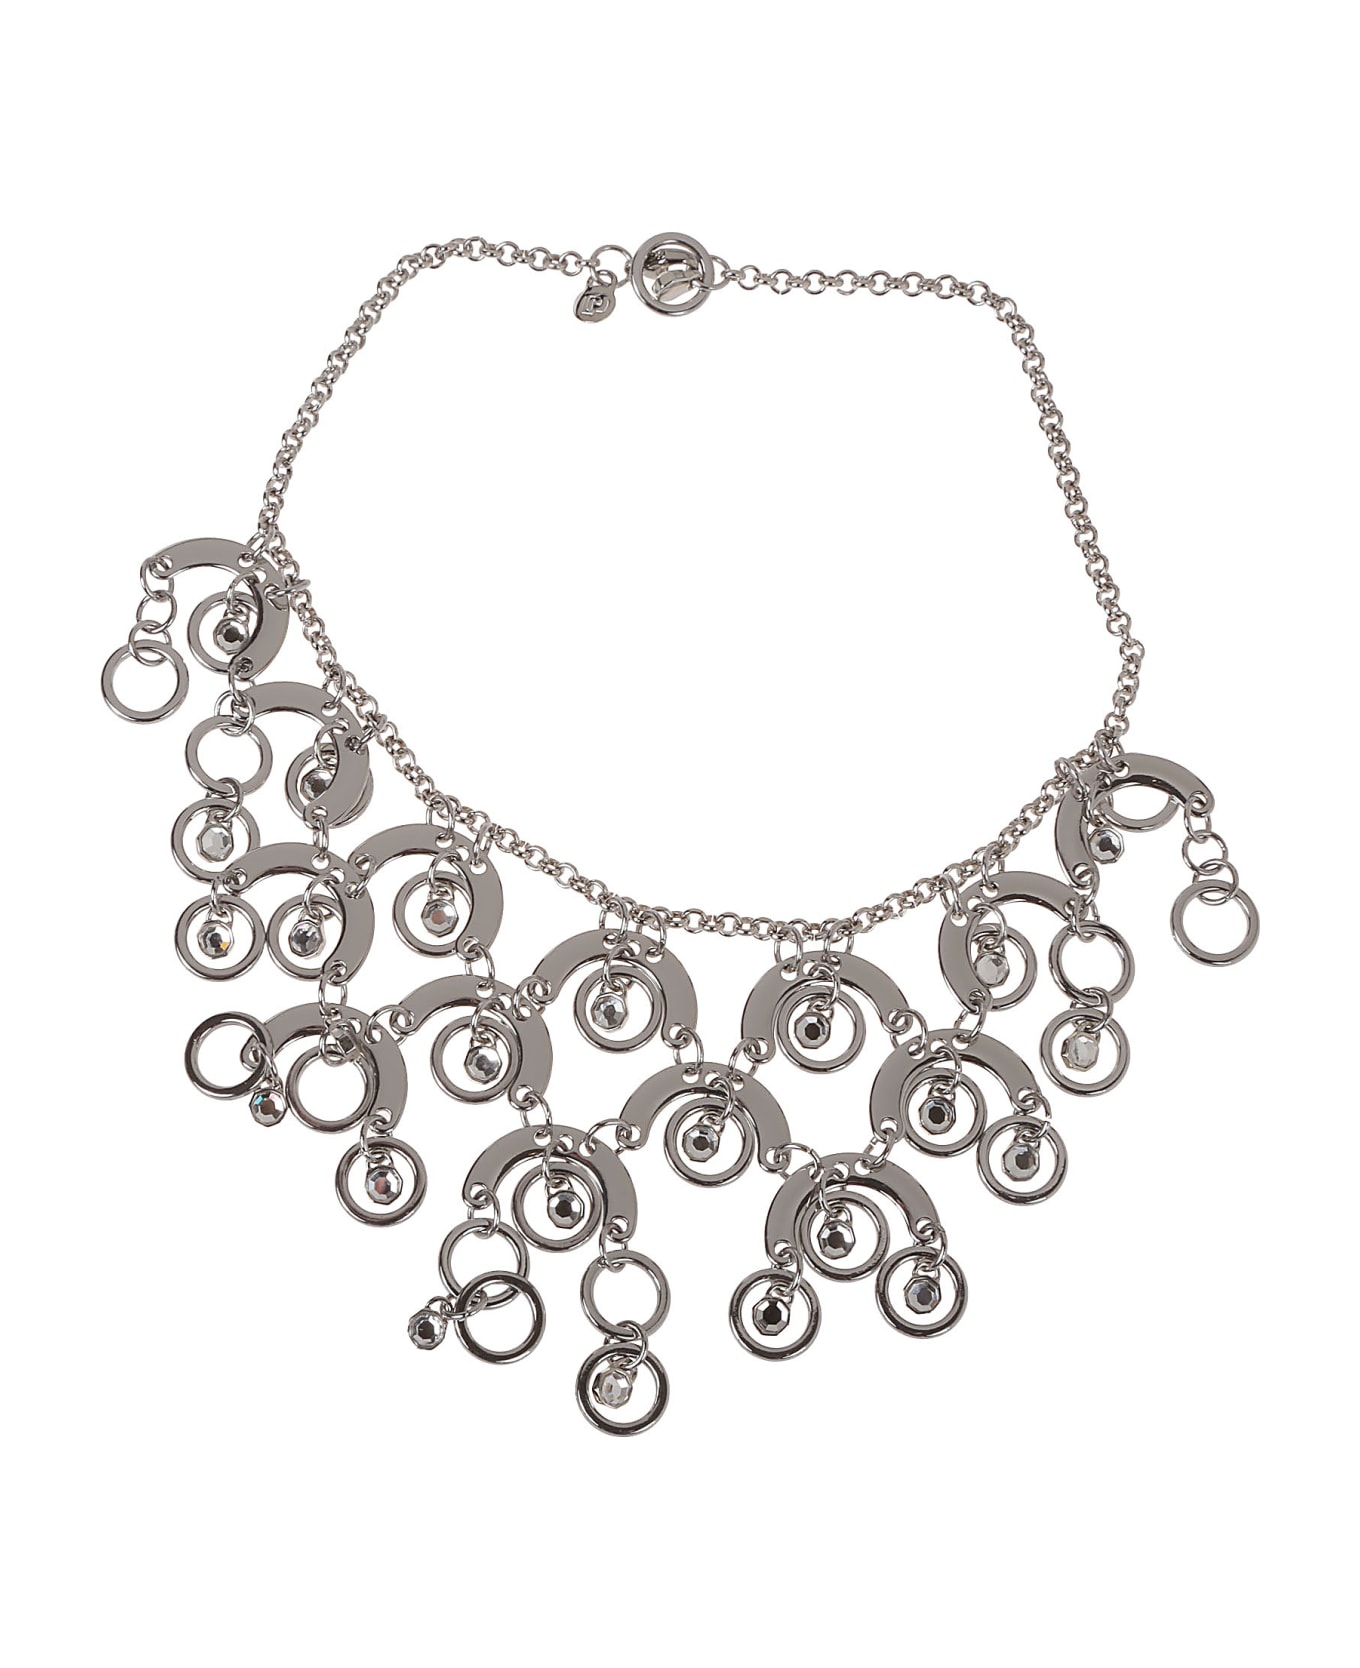 Paco Rabanne Sphere Necklace - Silver/crystal